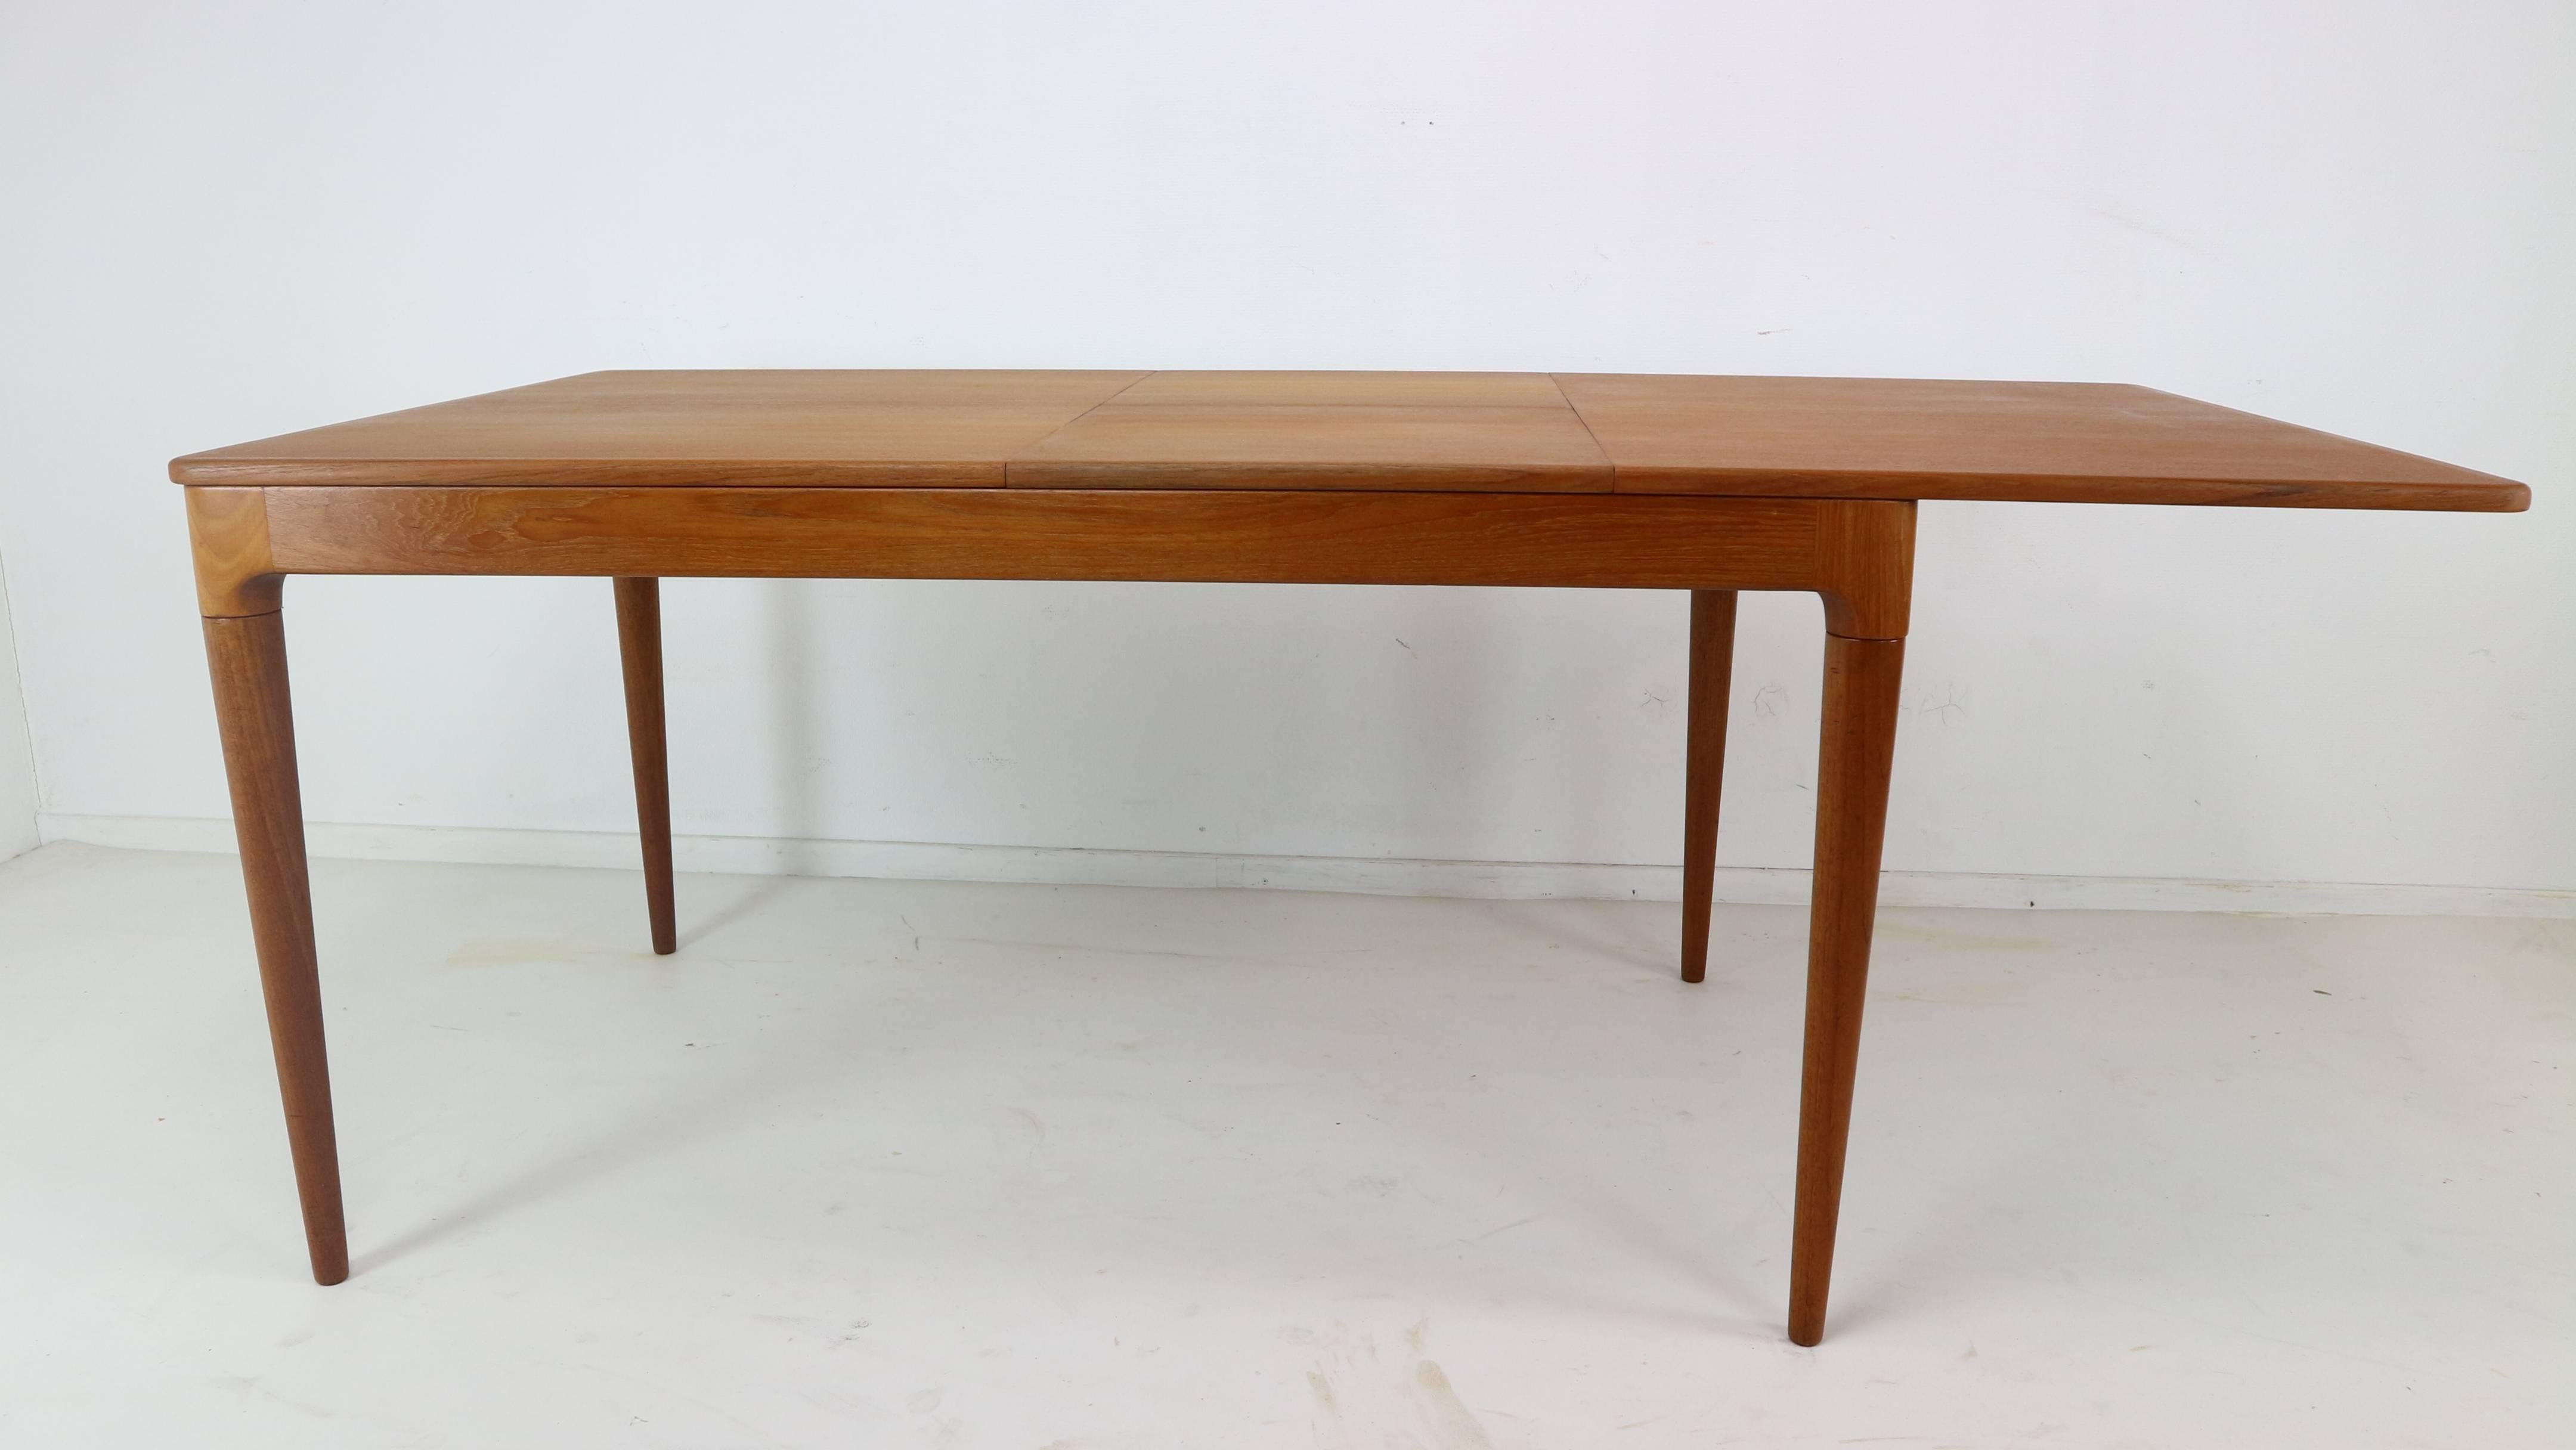 This Arne Hovmand-Olsen designed dining table epitomizes Danish craftsmanship at its finest. It is beautifully constructed with luxurious teak grain and vibrant color. The legs are substantial and supportive enough to accommodate two additional